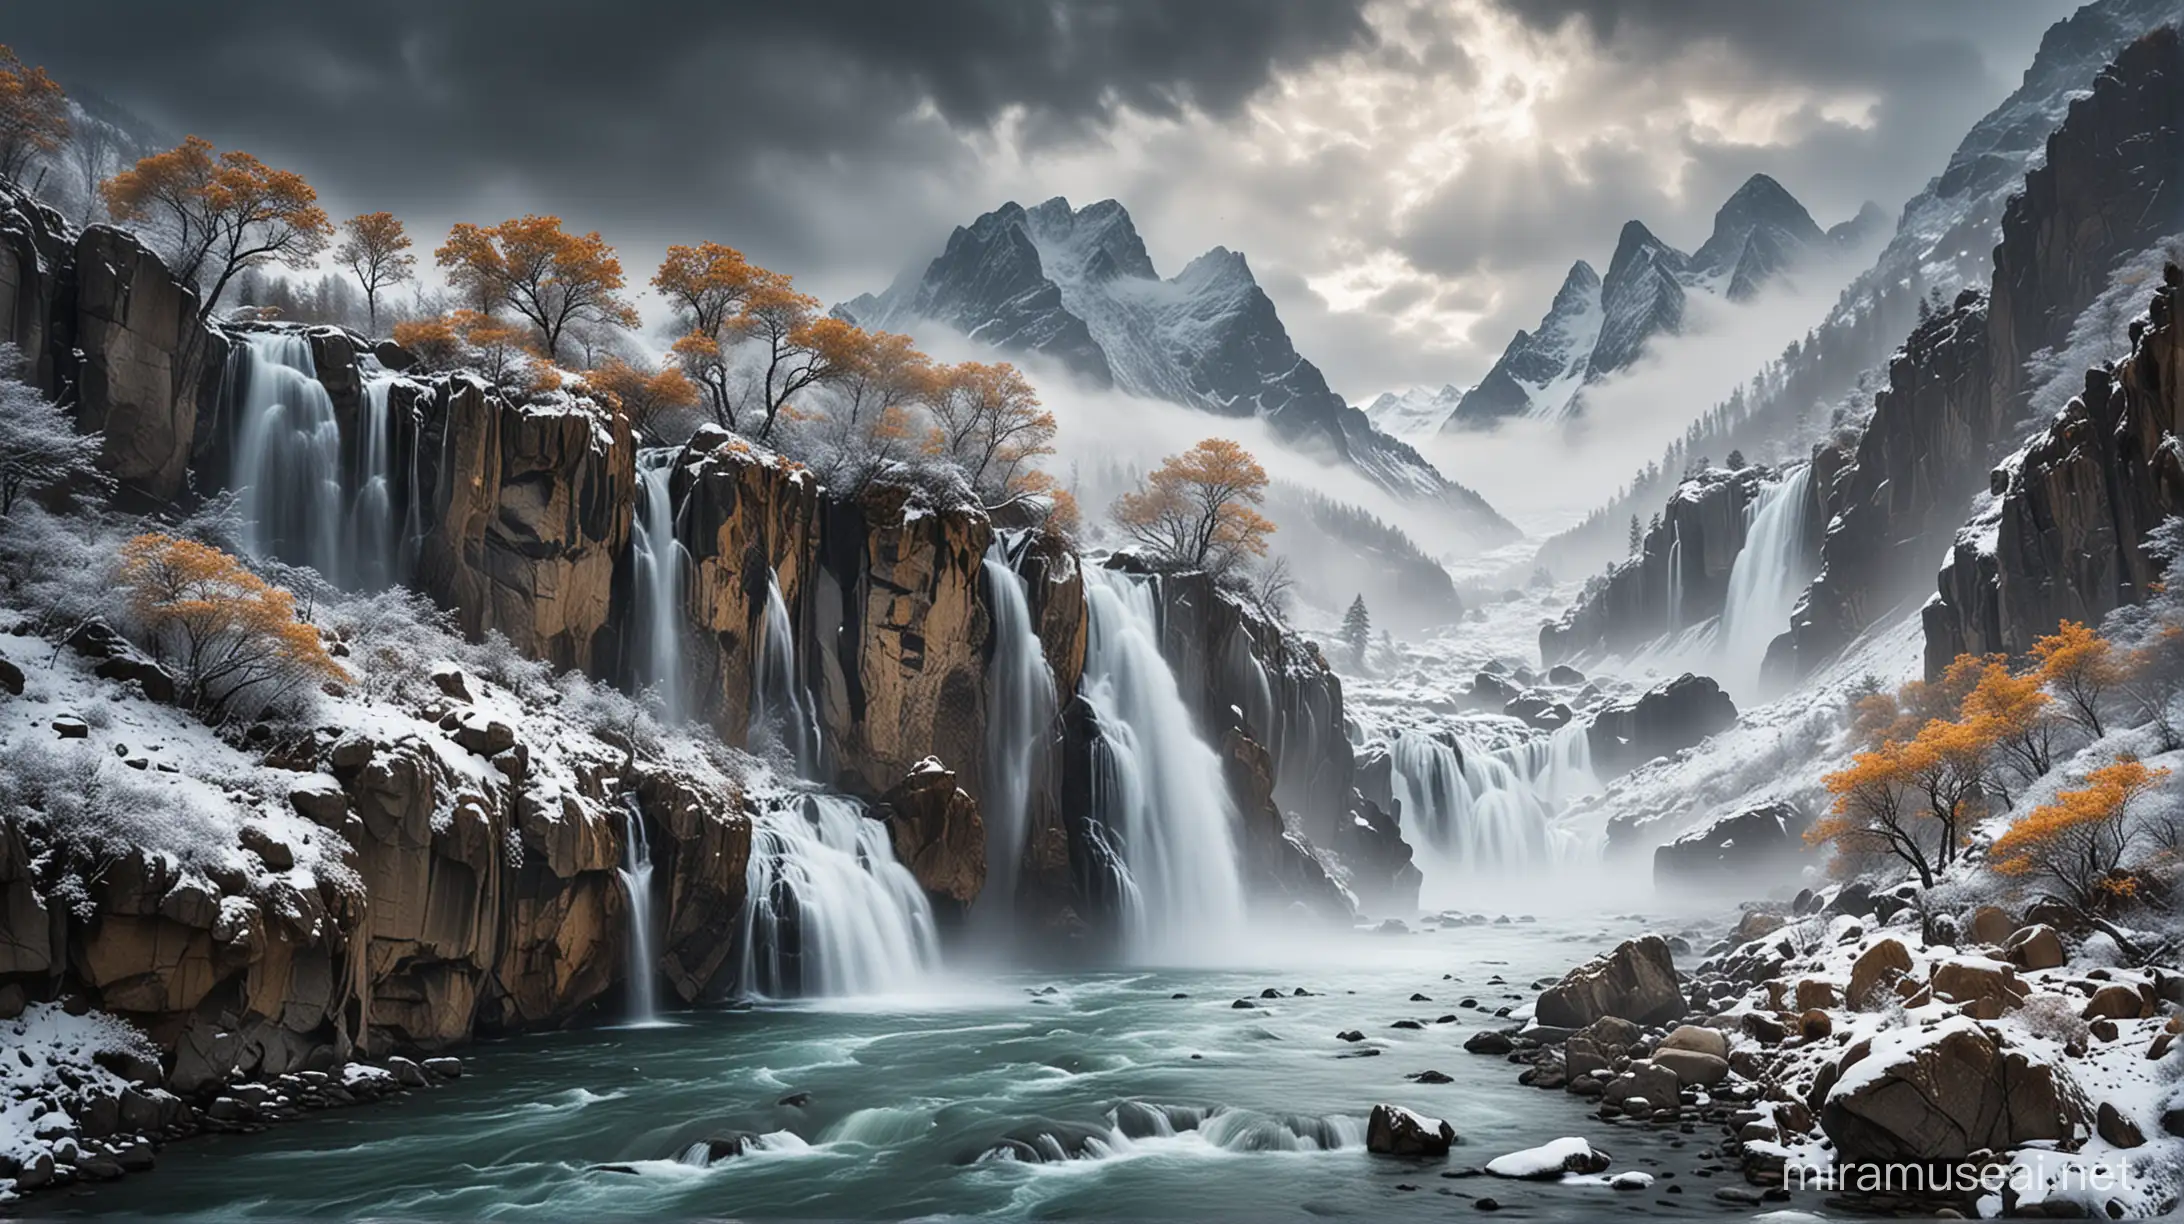 Majestic SnowCapped Mountains and Serene Valley Landscape with Waterfall